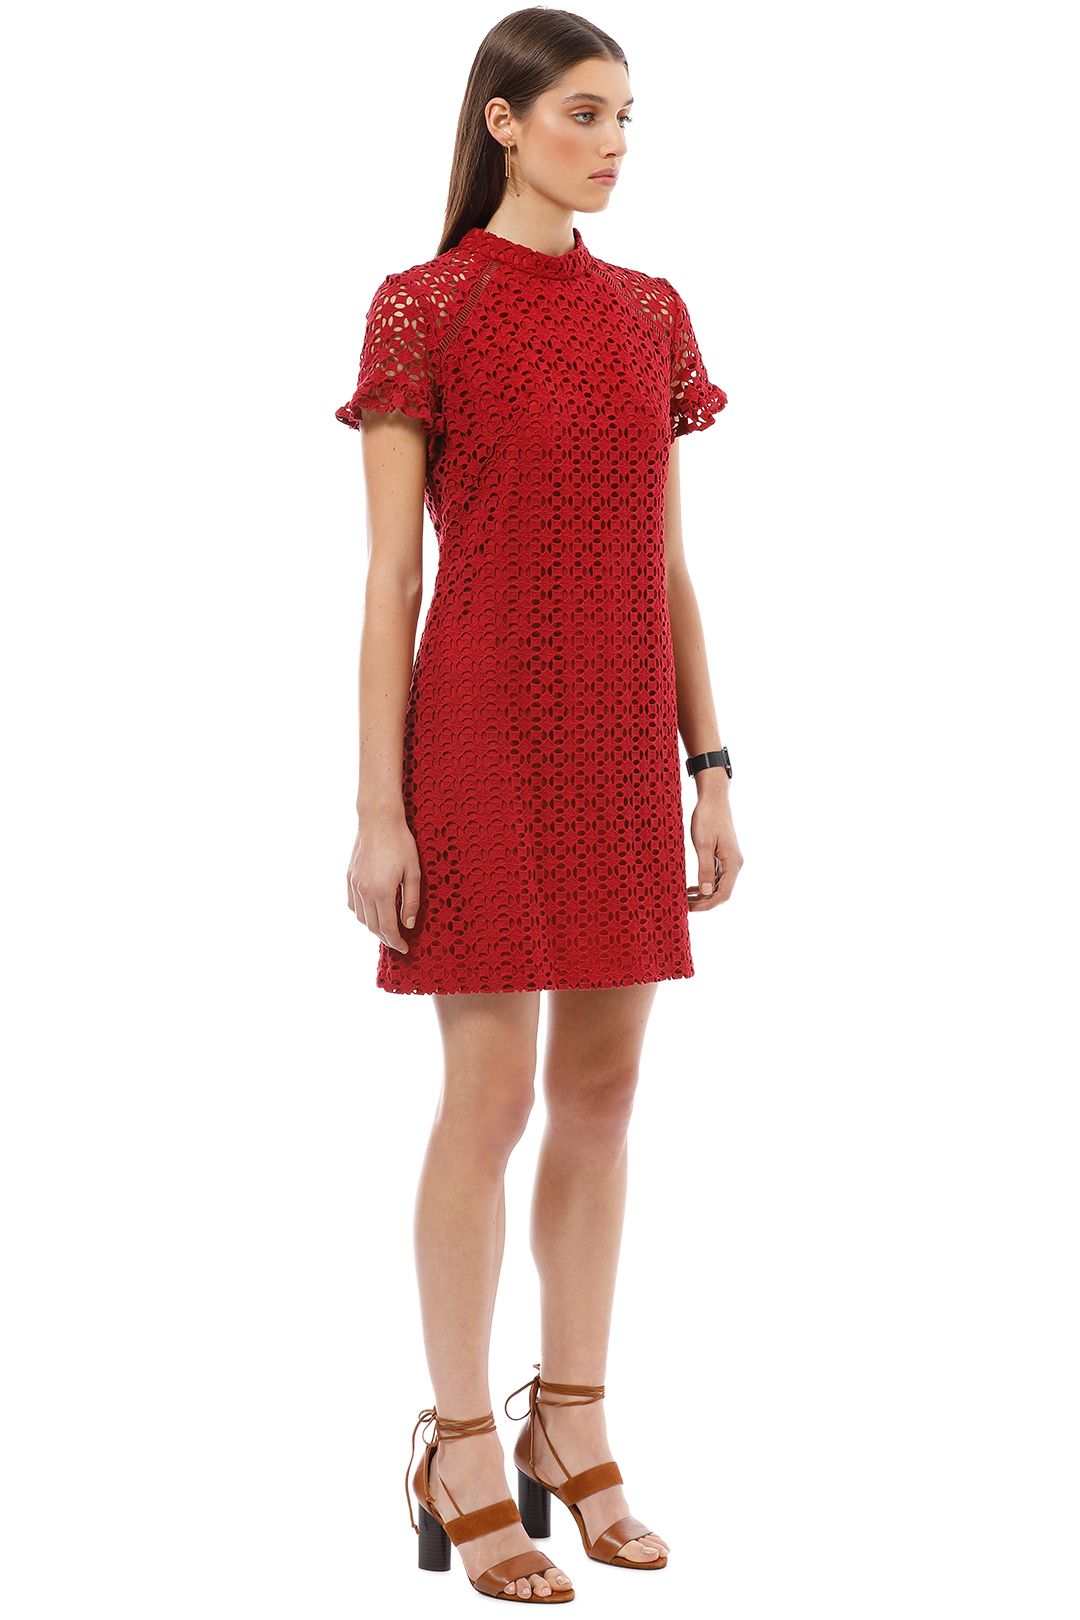 Cue - Lace Shift Dress - Red - Side